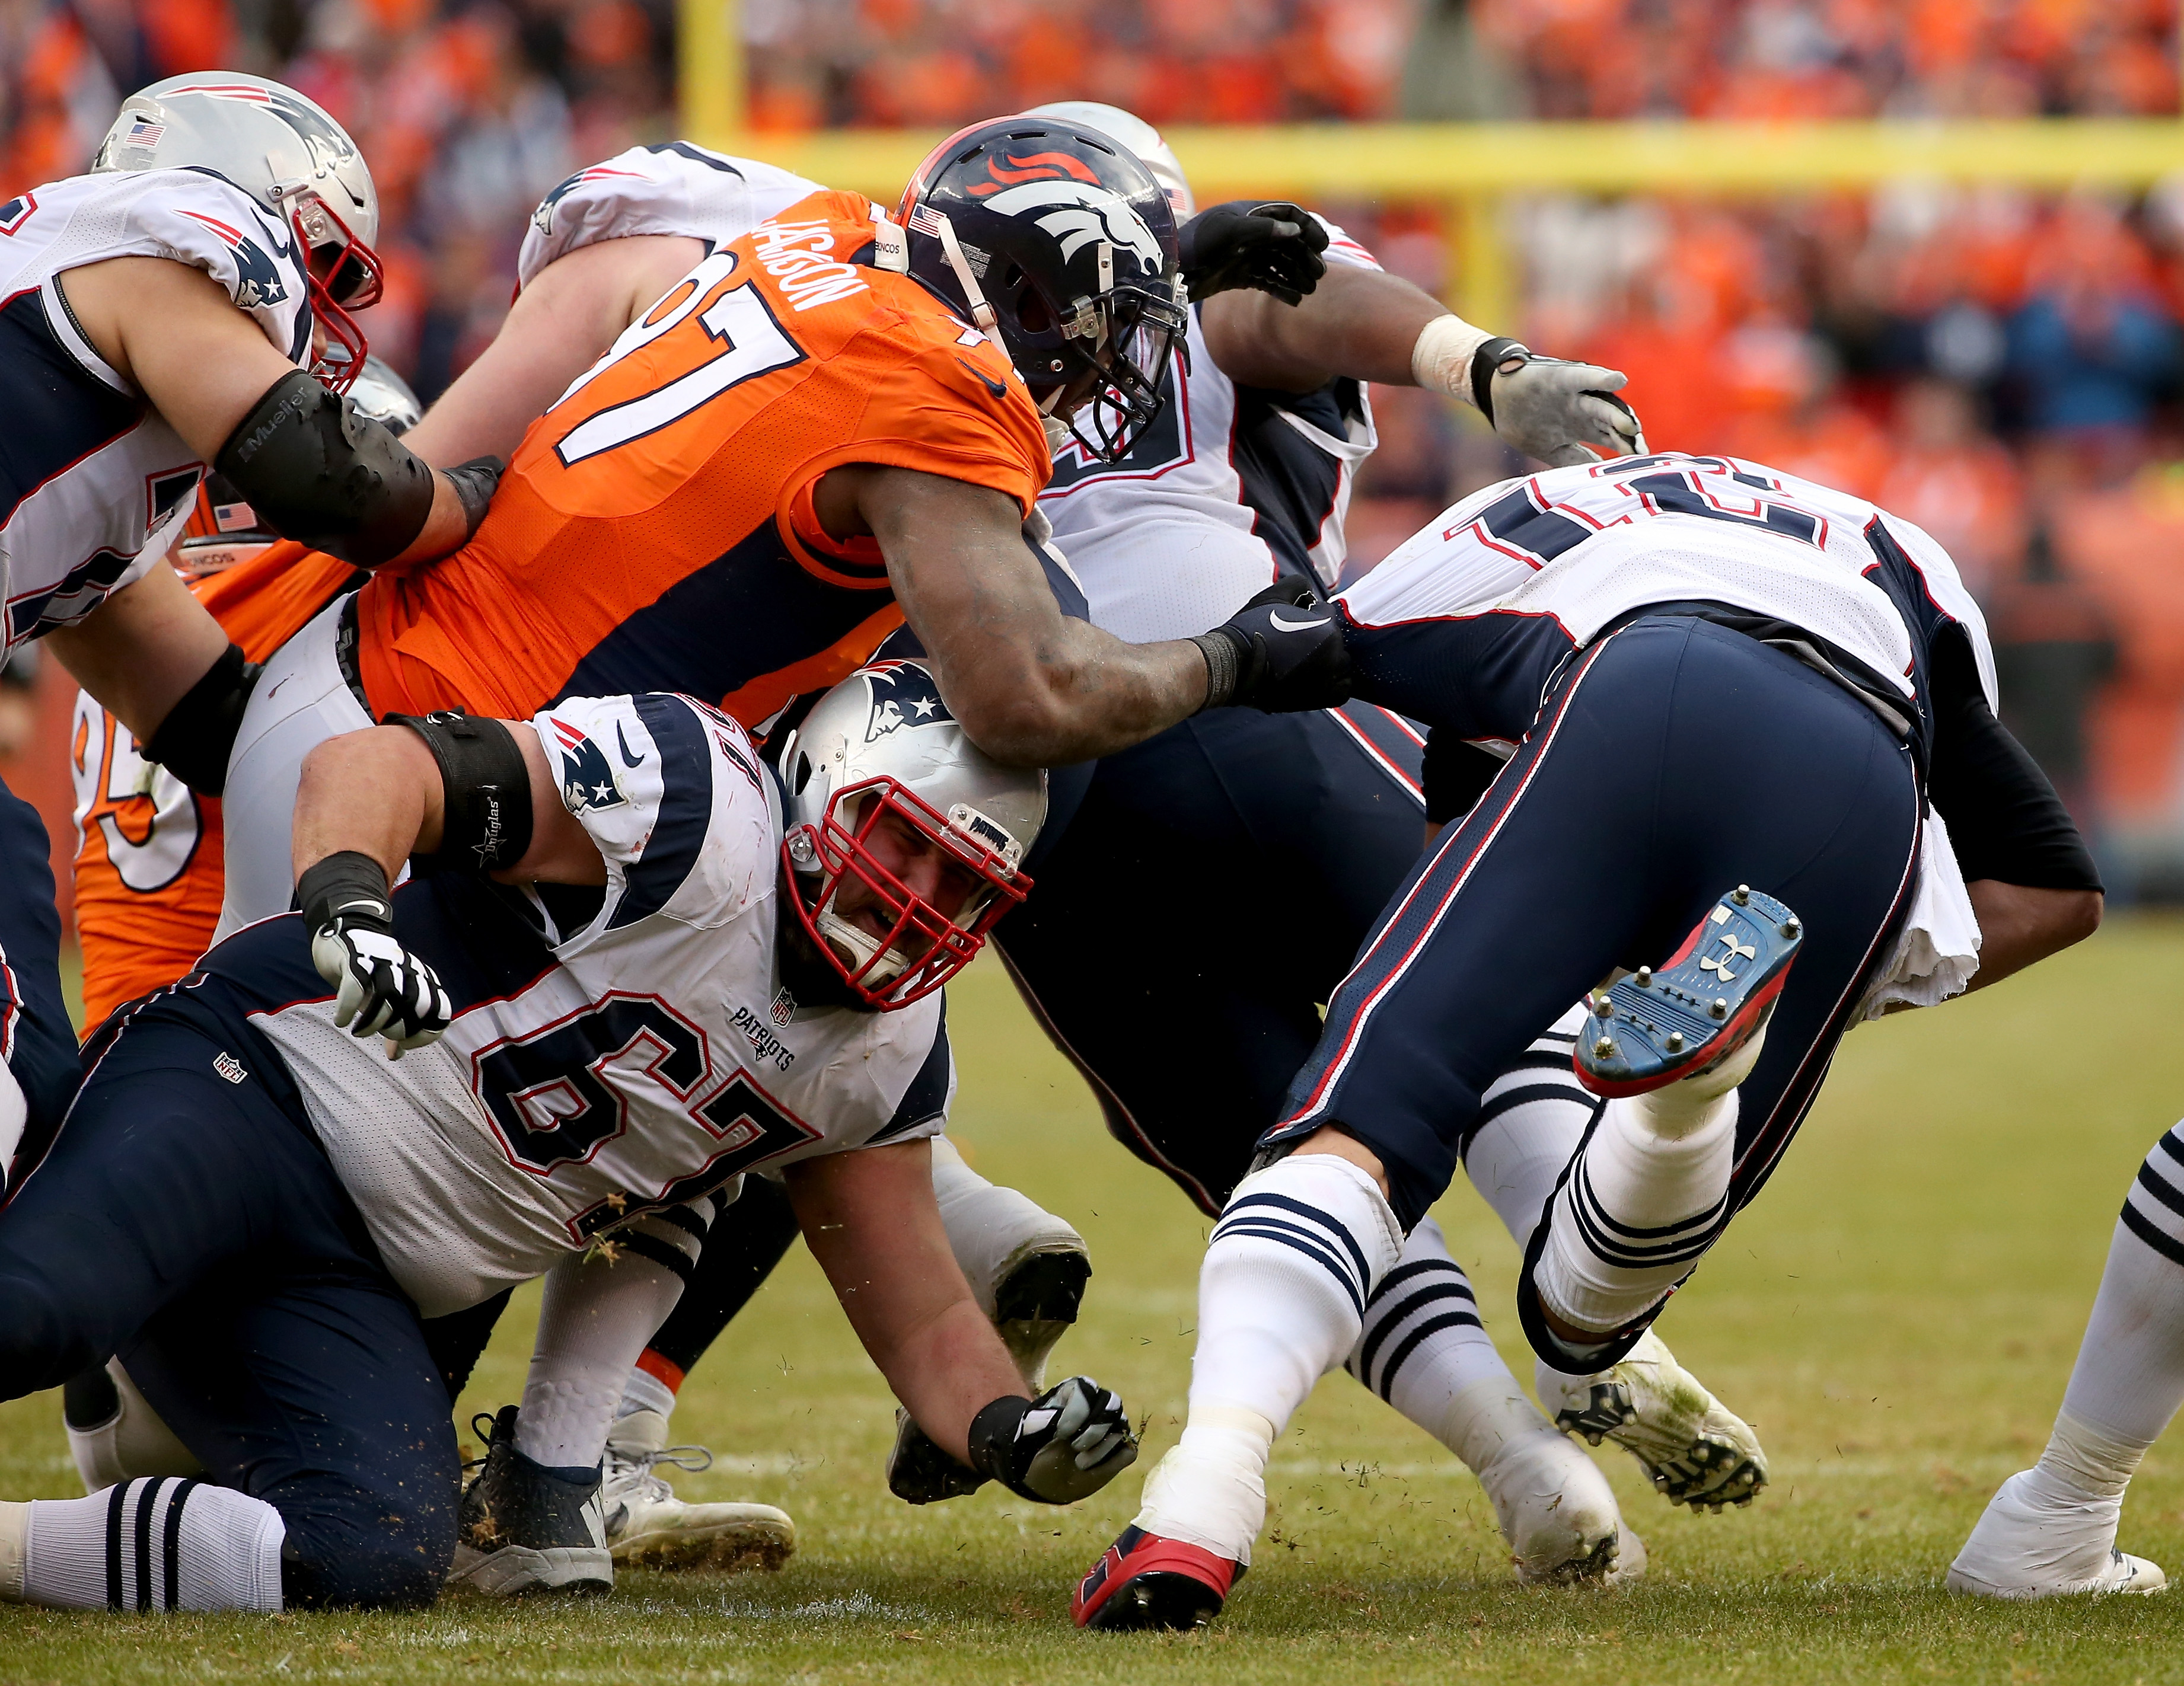 Tom Brady gets pulled down by Malik Jackson. (Photo by Doug Pensinger/Getty Images)